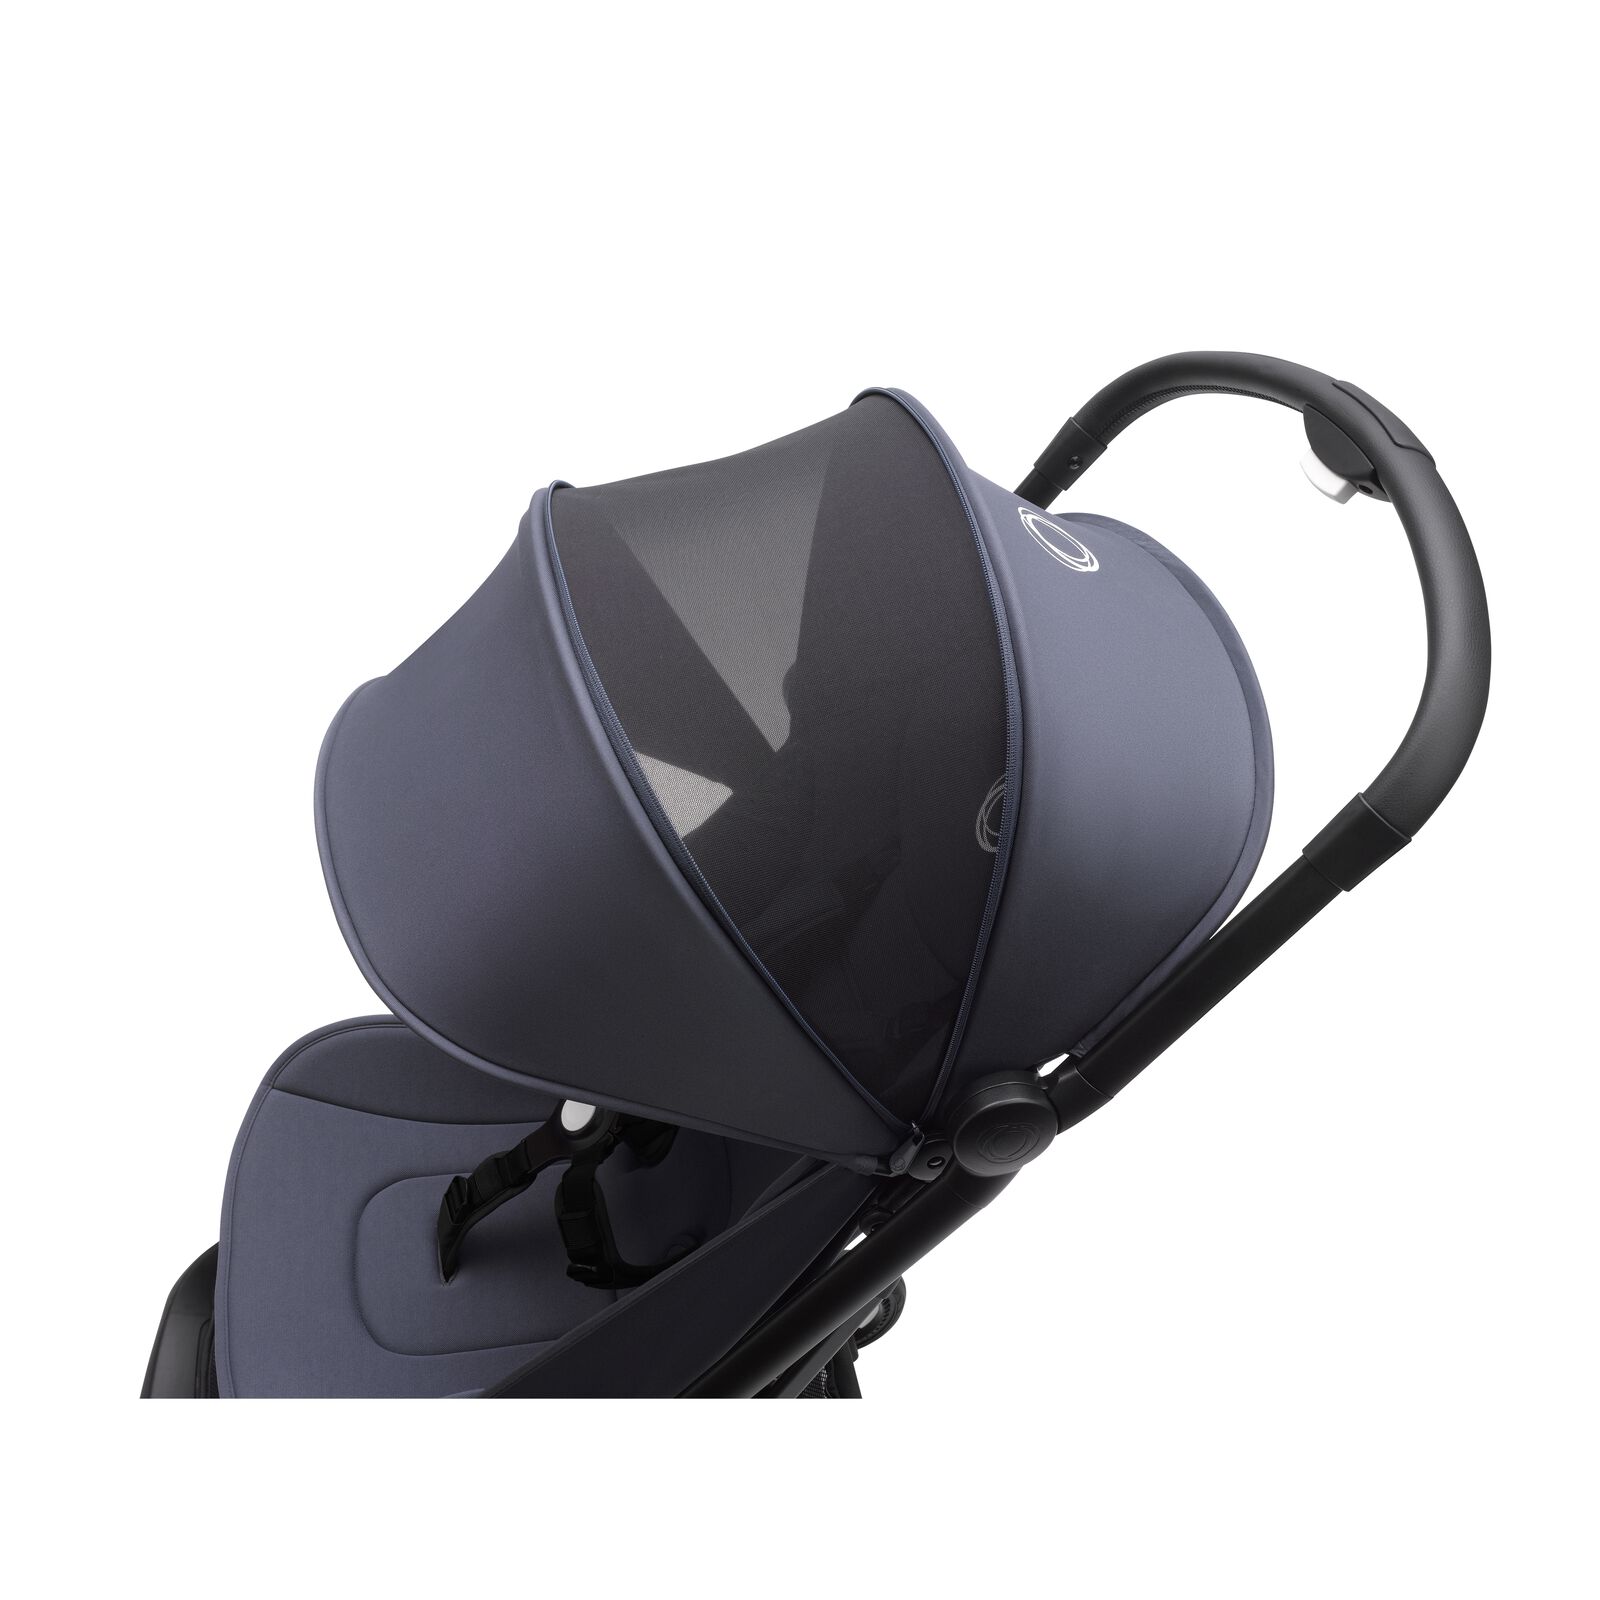 Bugaboo Butterfly seat pram - View 9